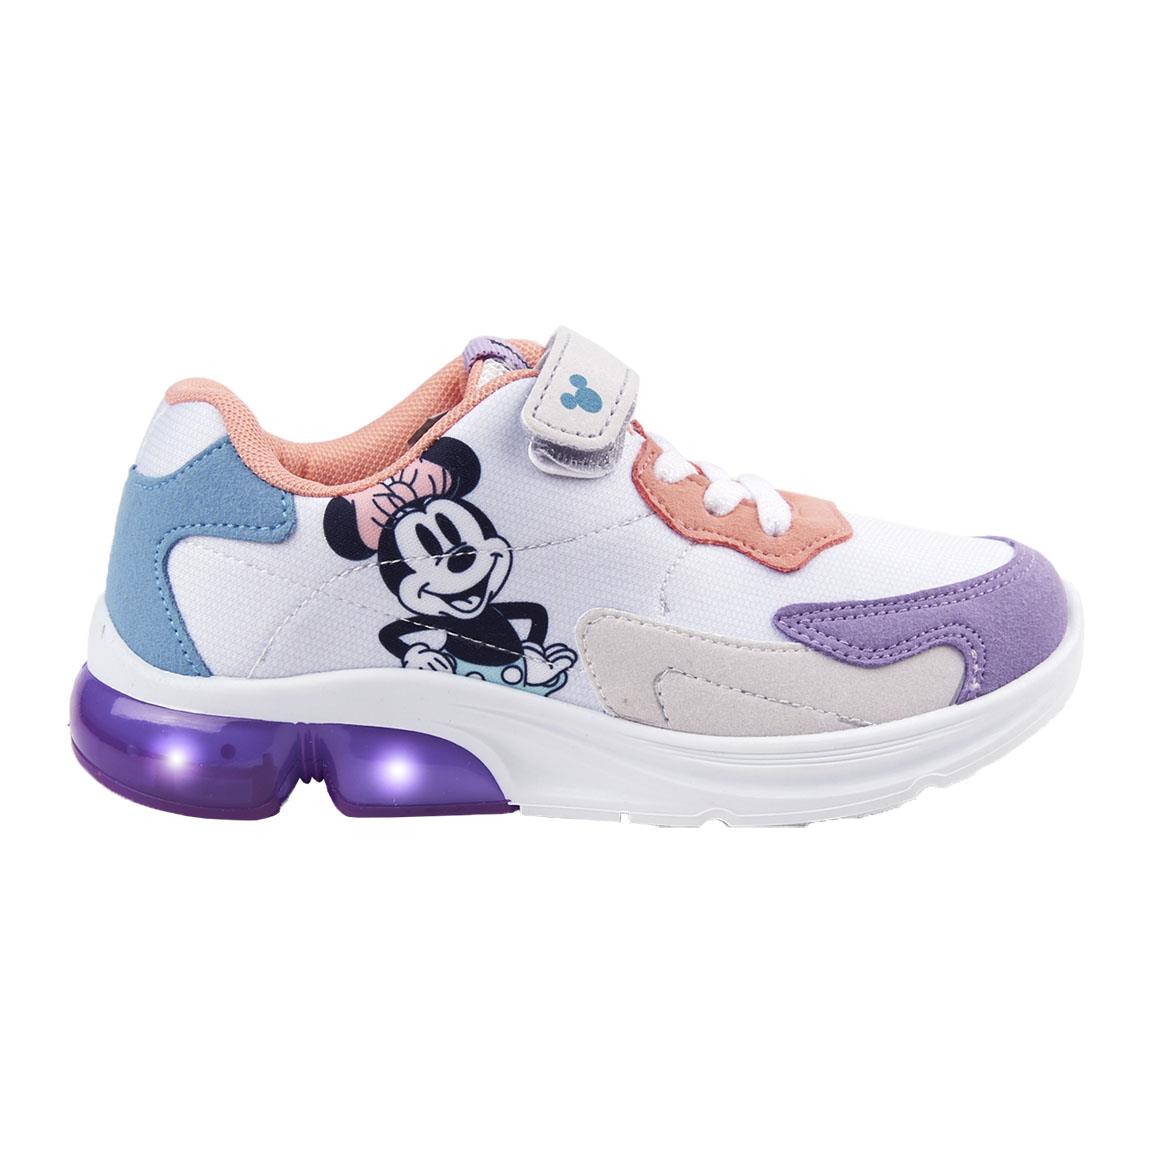 SPORTY SHOES PVC SOLE WITH LIGHTS MINNIE